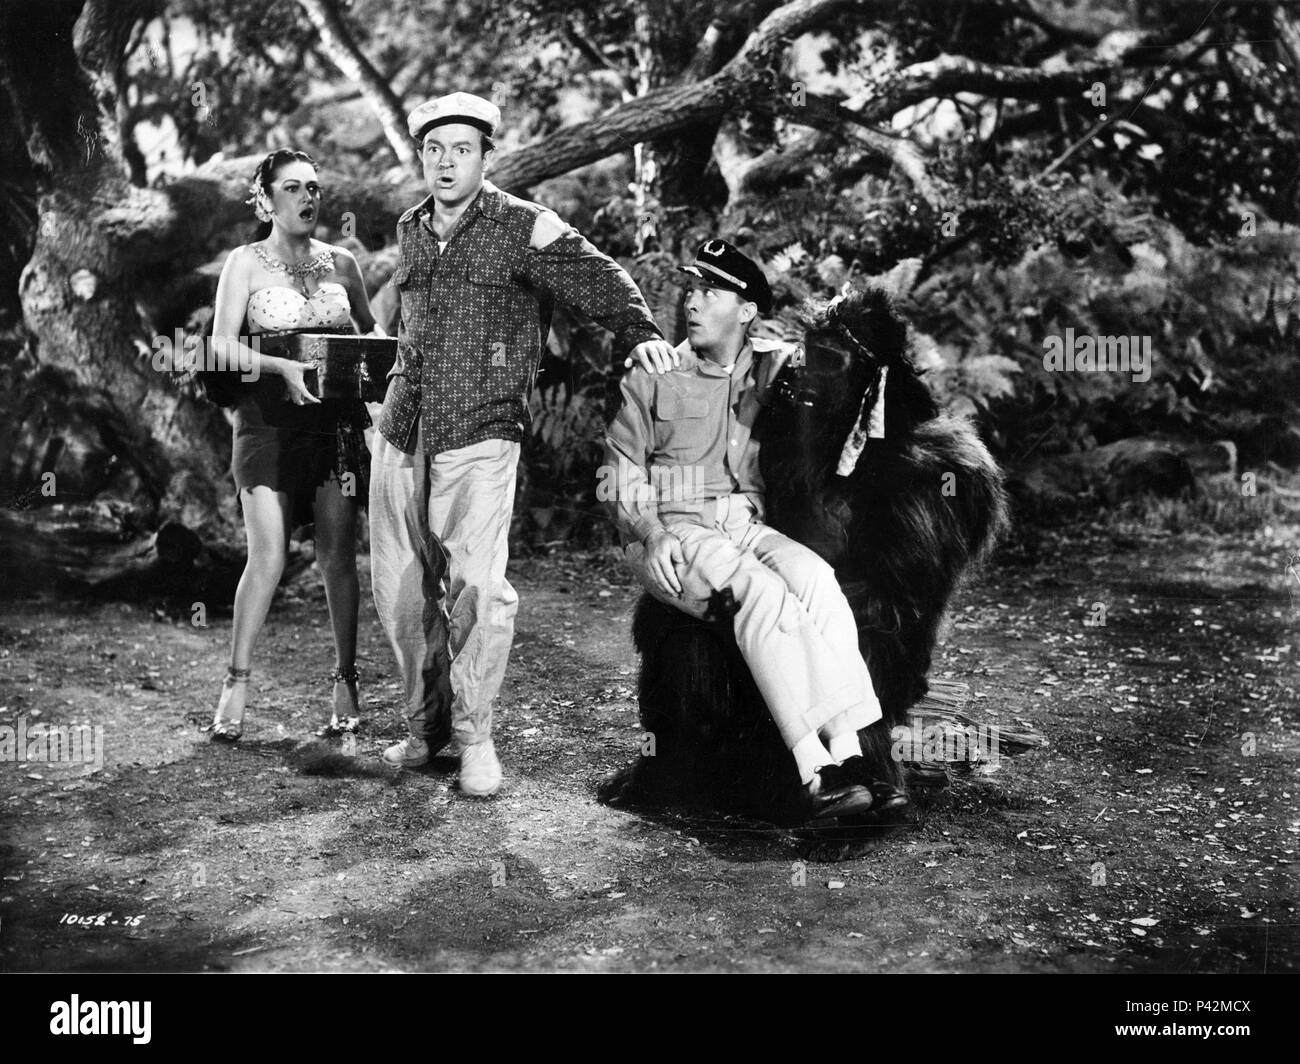 Original Film Title: ROAD TO BALI.  English Title: ROAD TO BALI.  Film Director: HAL WALKER.  Year: 1952.  Stars: BOB HOPE; BING CROSBY; DOROTHY LAMOUR. Credit: PARAMOUNT PICTURES / Album Stock Photo